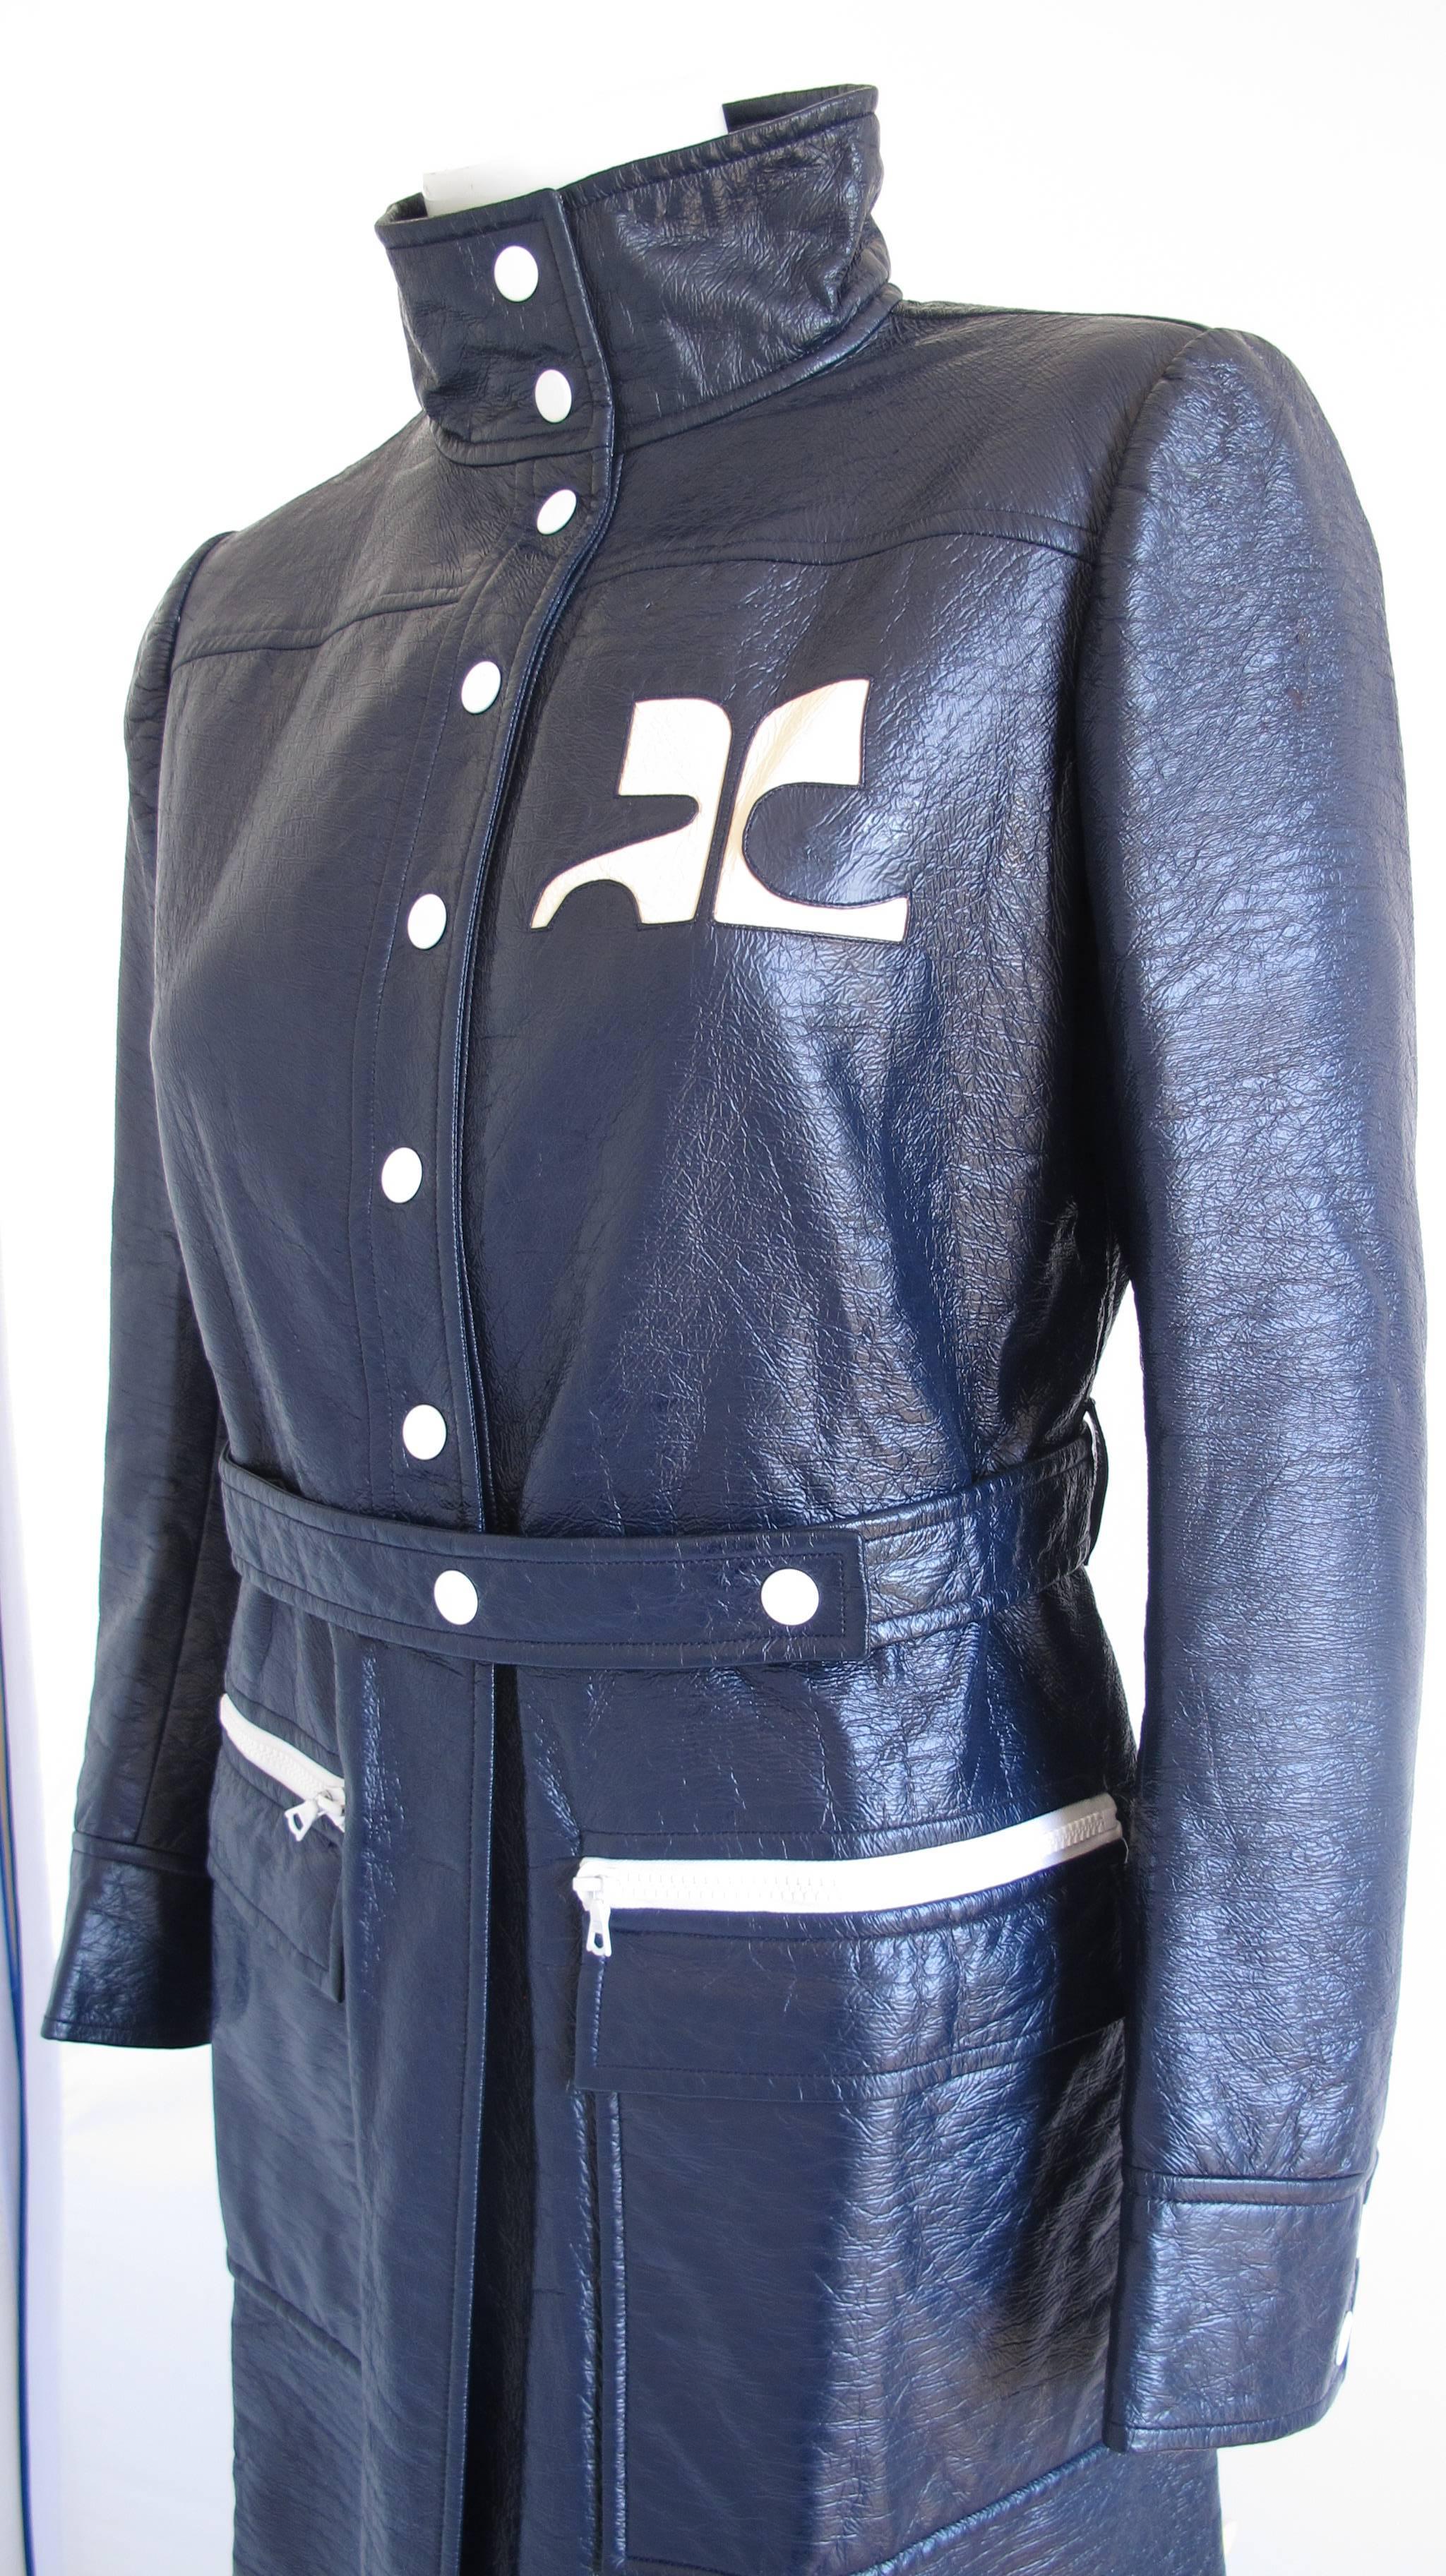 Iconic Courreges vinyl trench in navy blue with painted button snap front closure and oversize patch pockets with top zip closure. In excellent condition with faint almost imperceptible fading at the top back neck lining. Labeled Courreges size C.